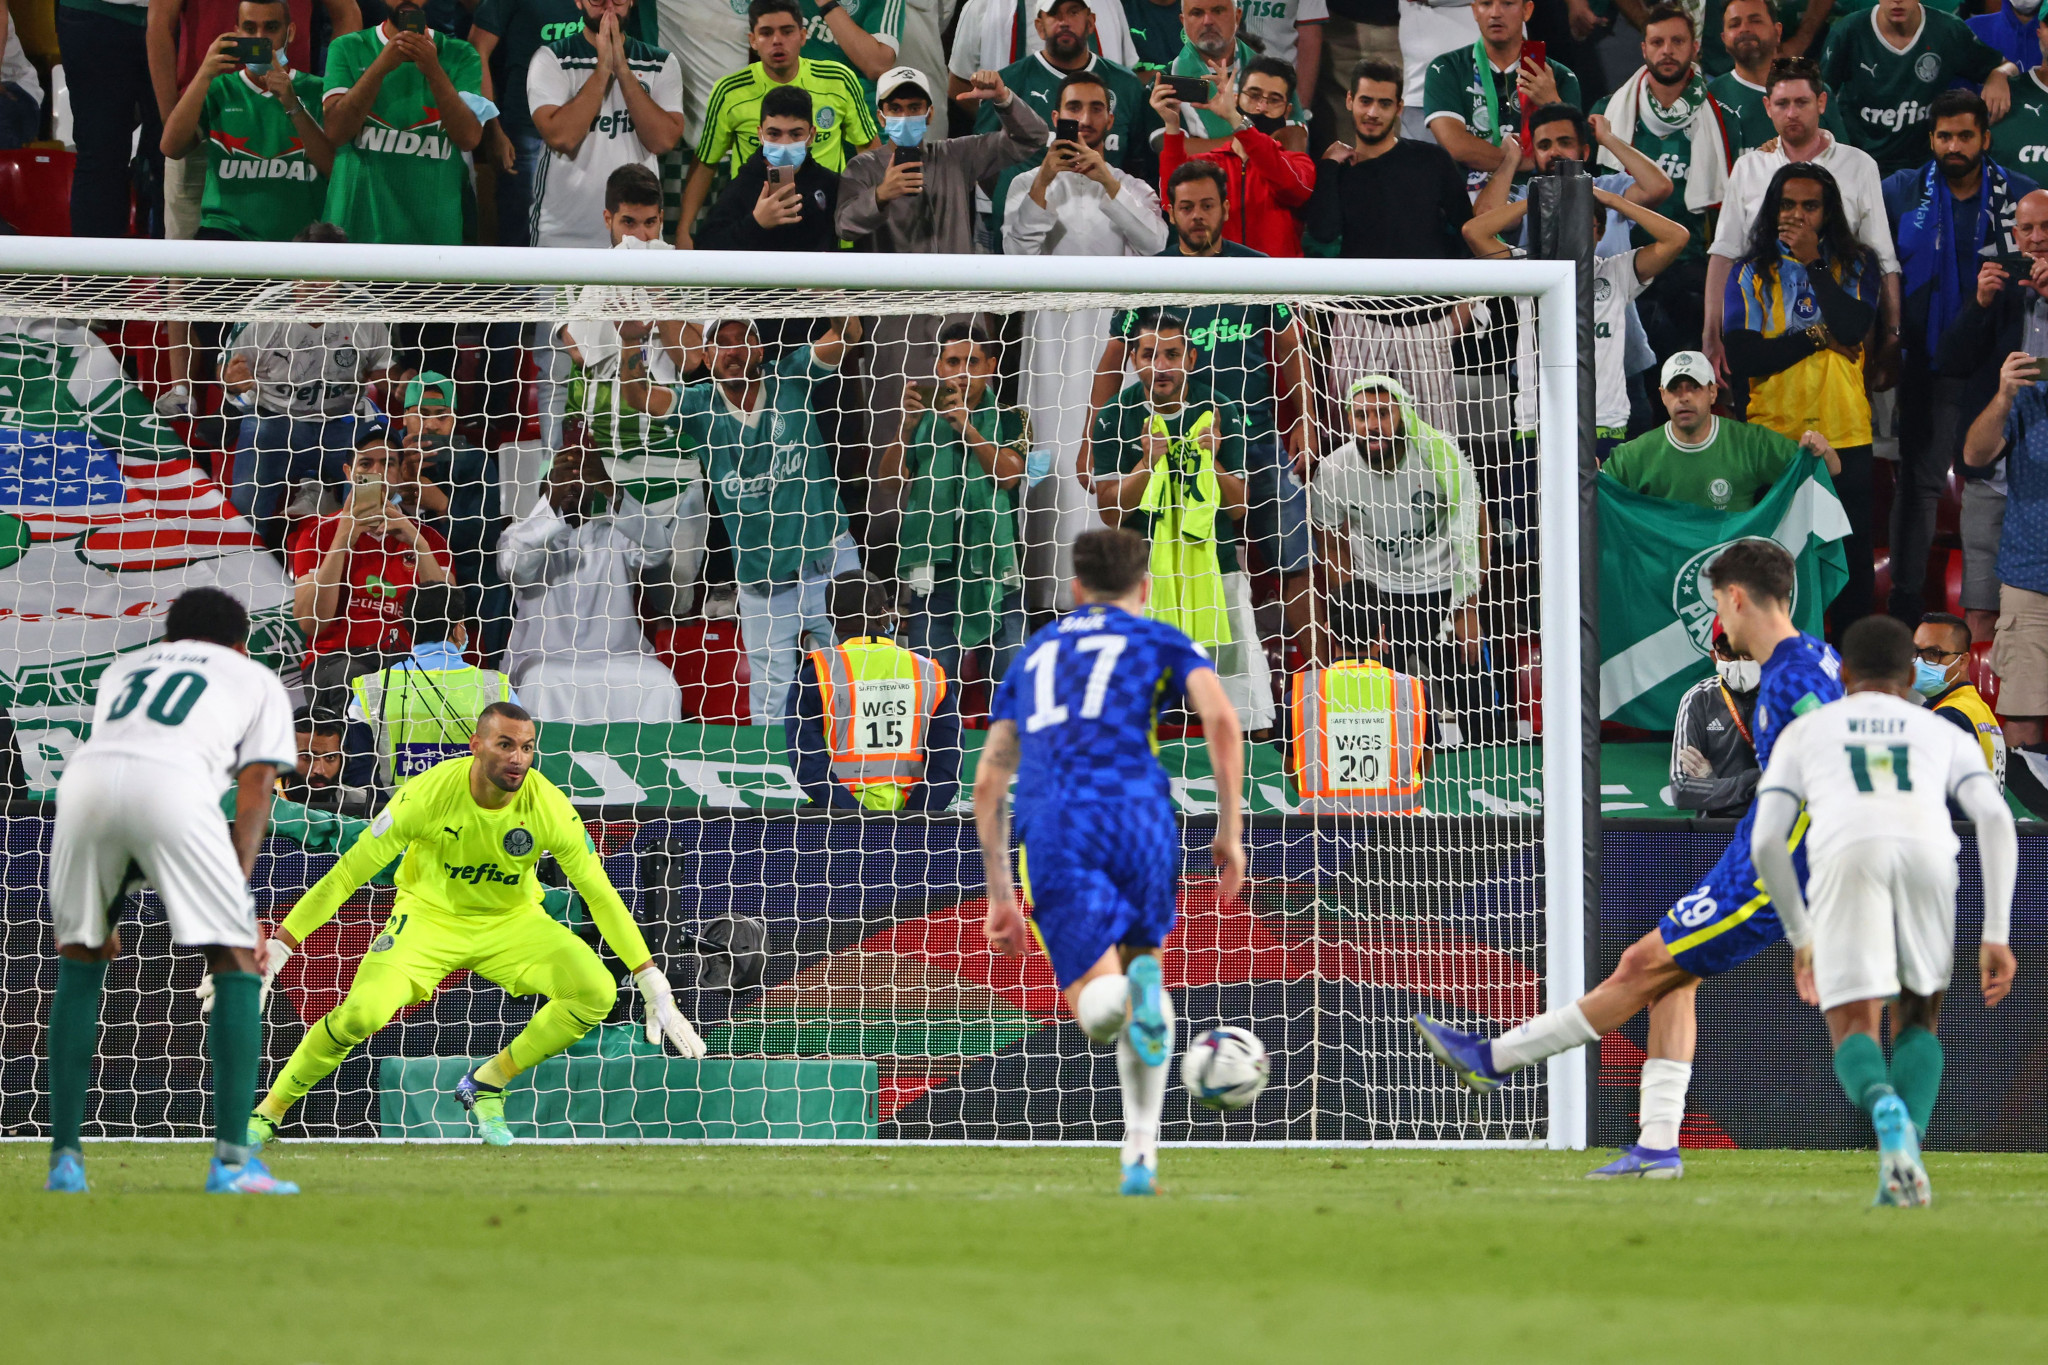 German international Kai Havertz, who scored the only goal of the UEFA Champions League final, struck the winner for Chelsea from the penalty spot ©Getty Images